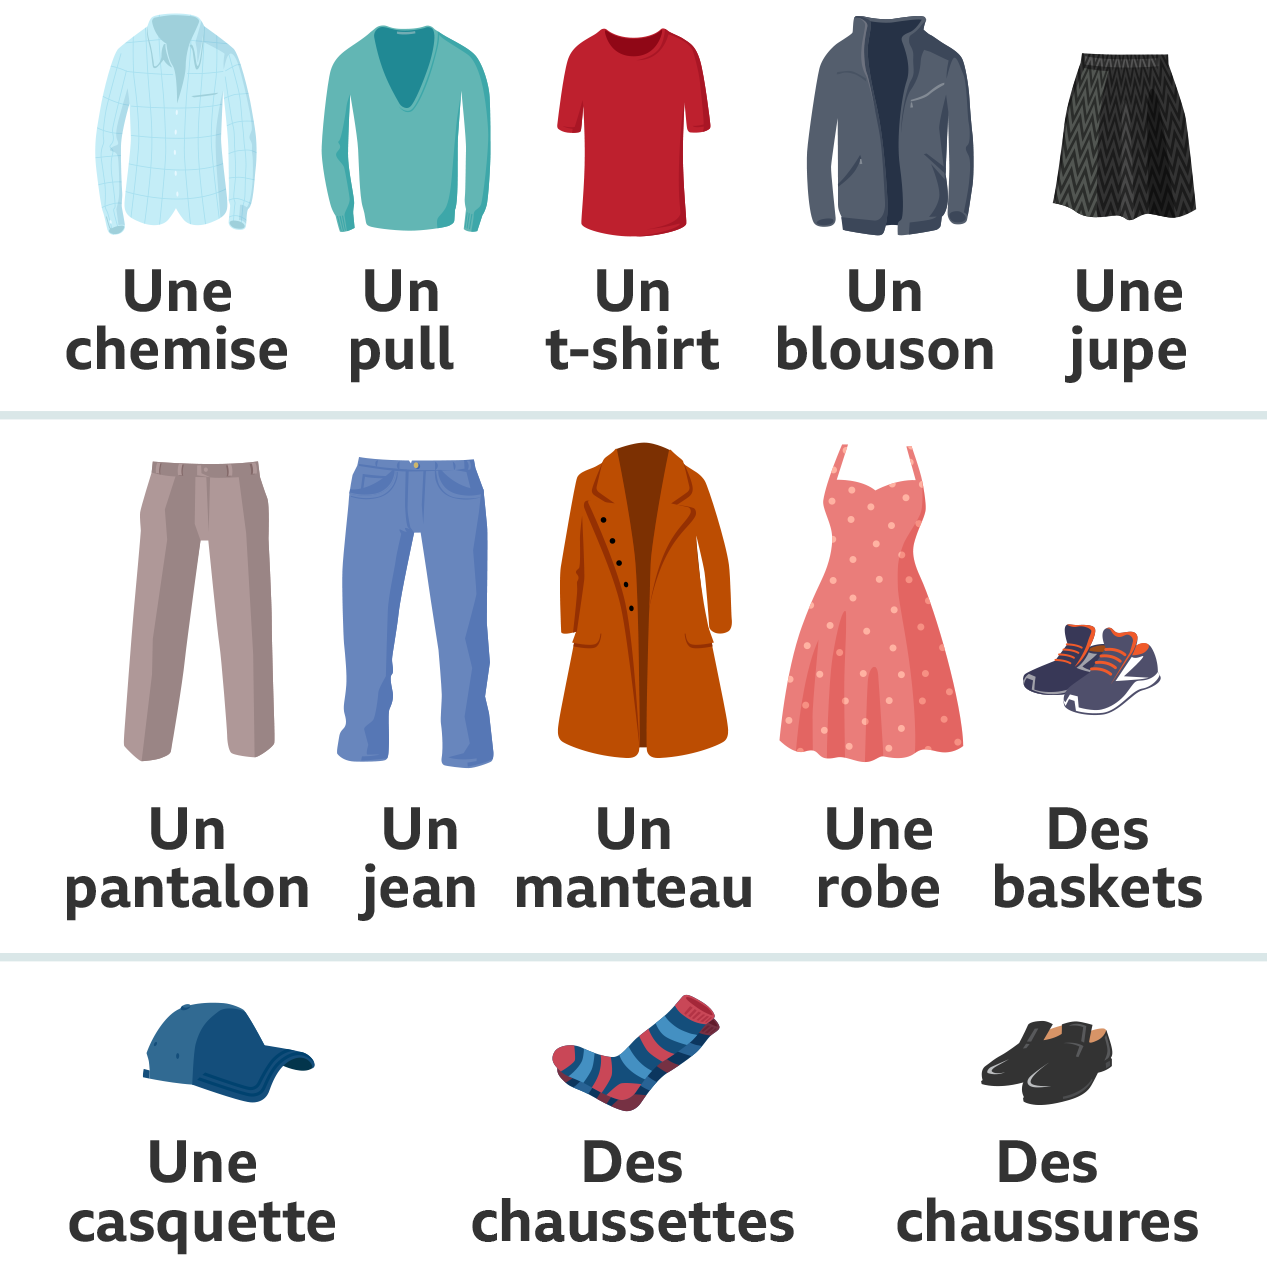 Learn Vocabulary Through Pictures - Describing Clothing - English Practice  Online